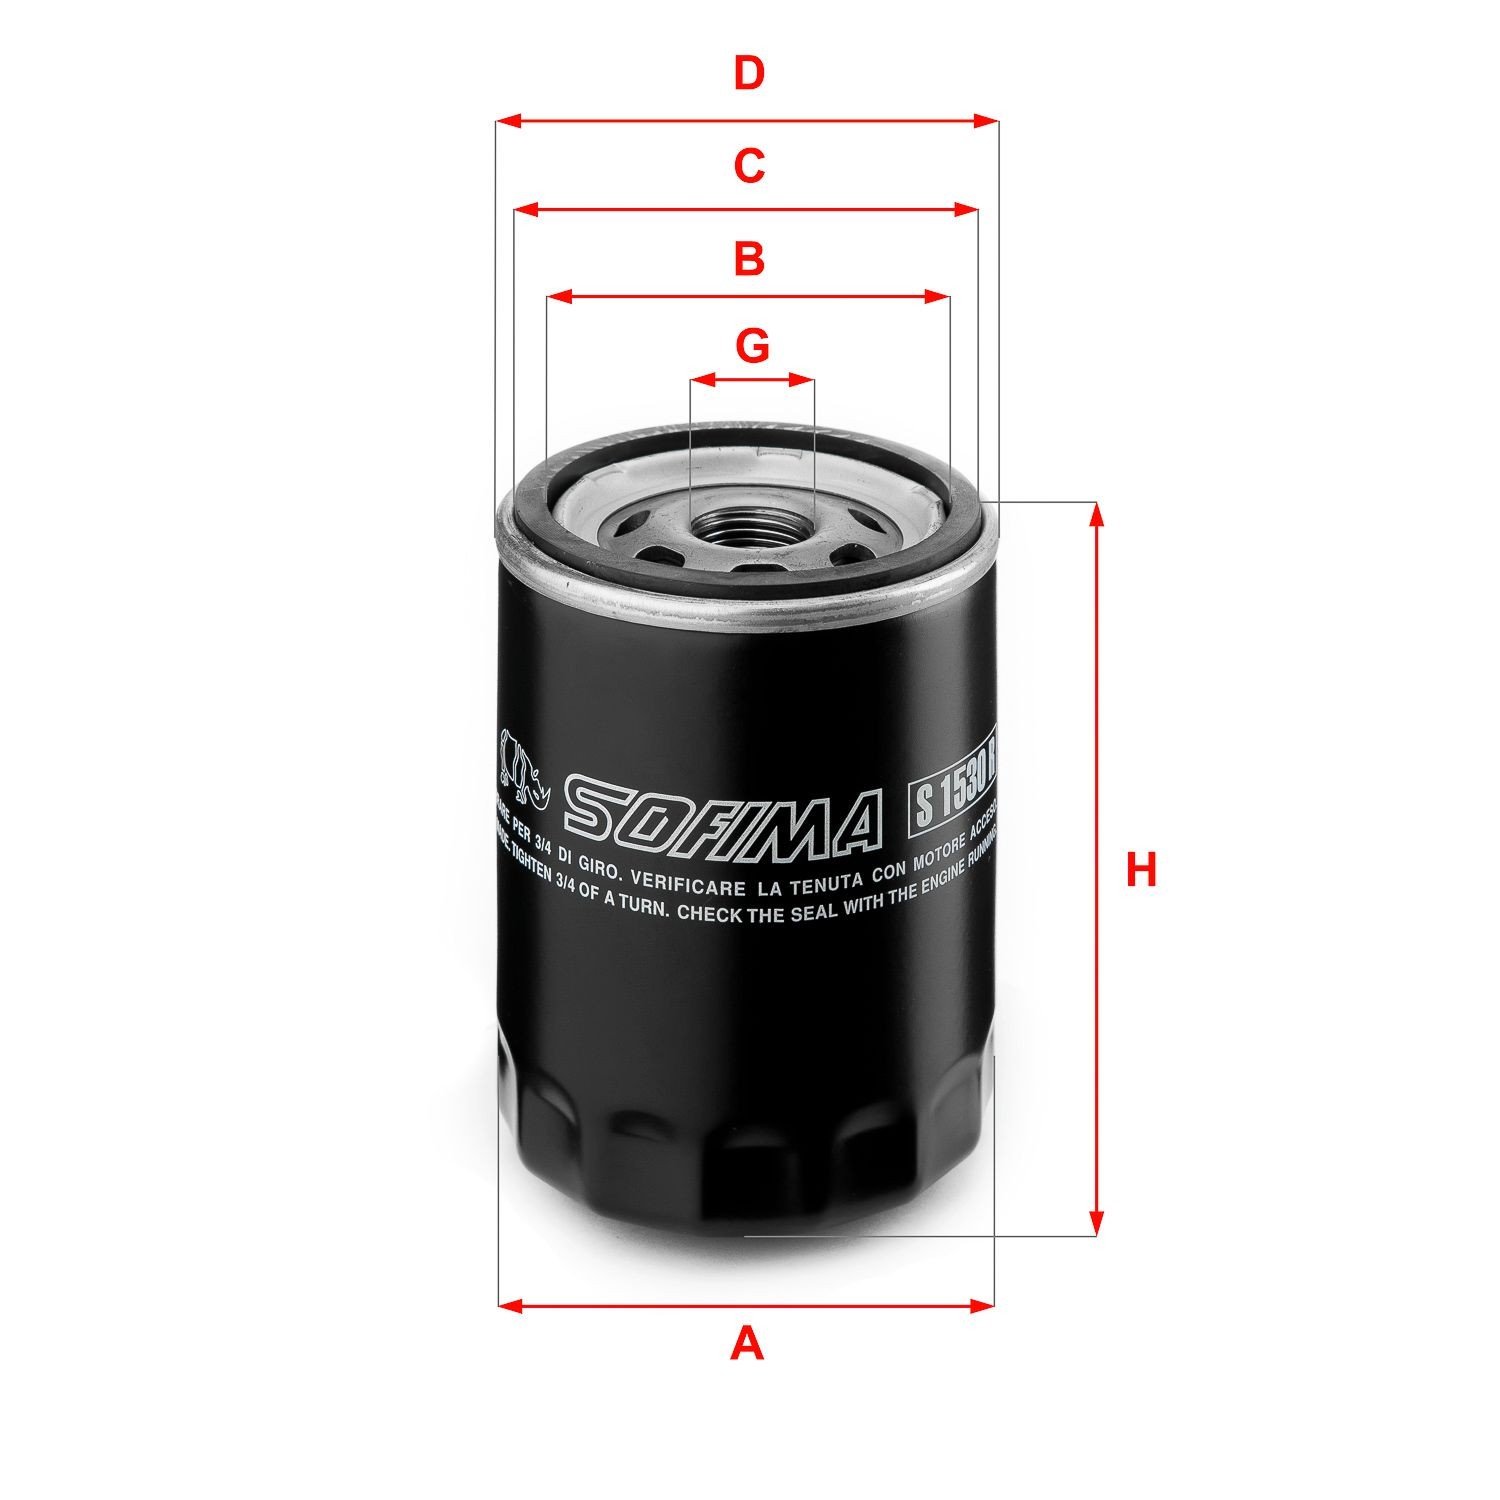 SOFIMA S 1530 R Oil filter 3/4-16 UNF, with one anti-return valve, Spin-on Filter